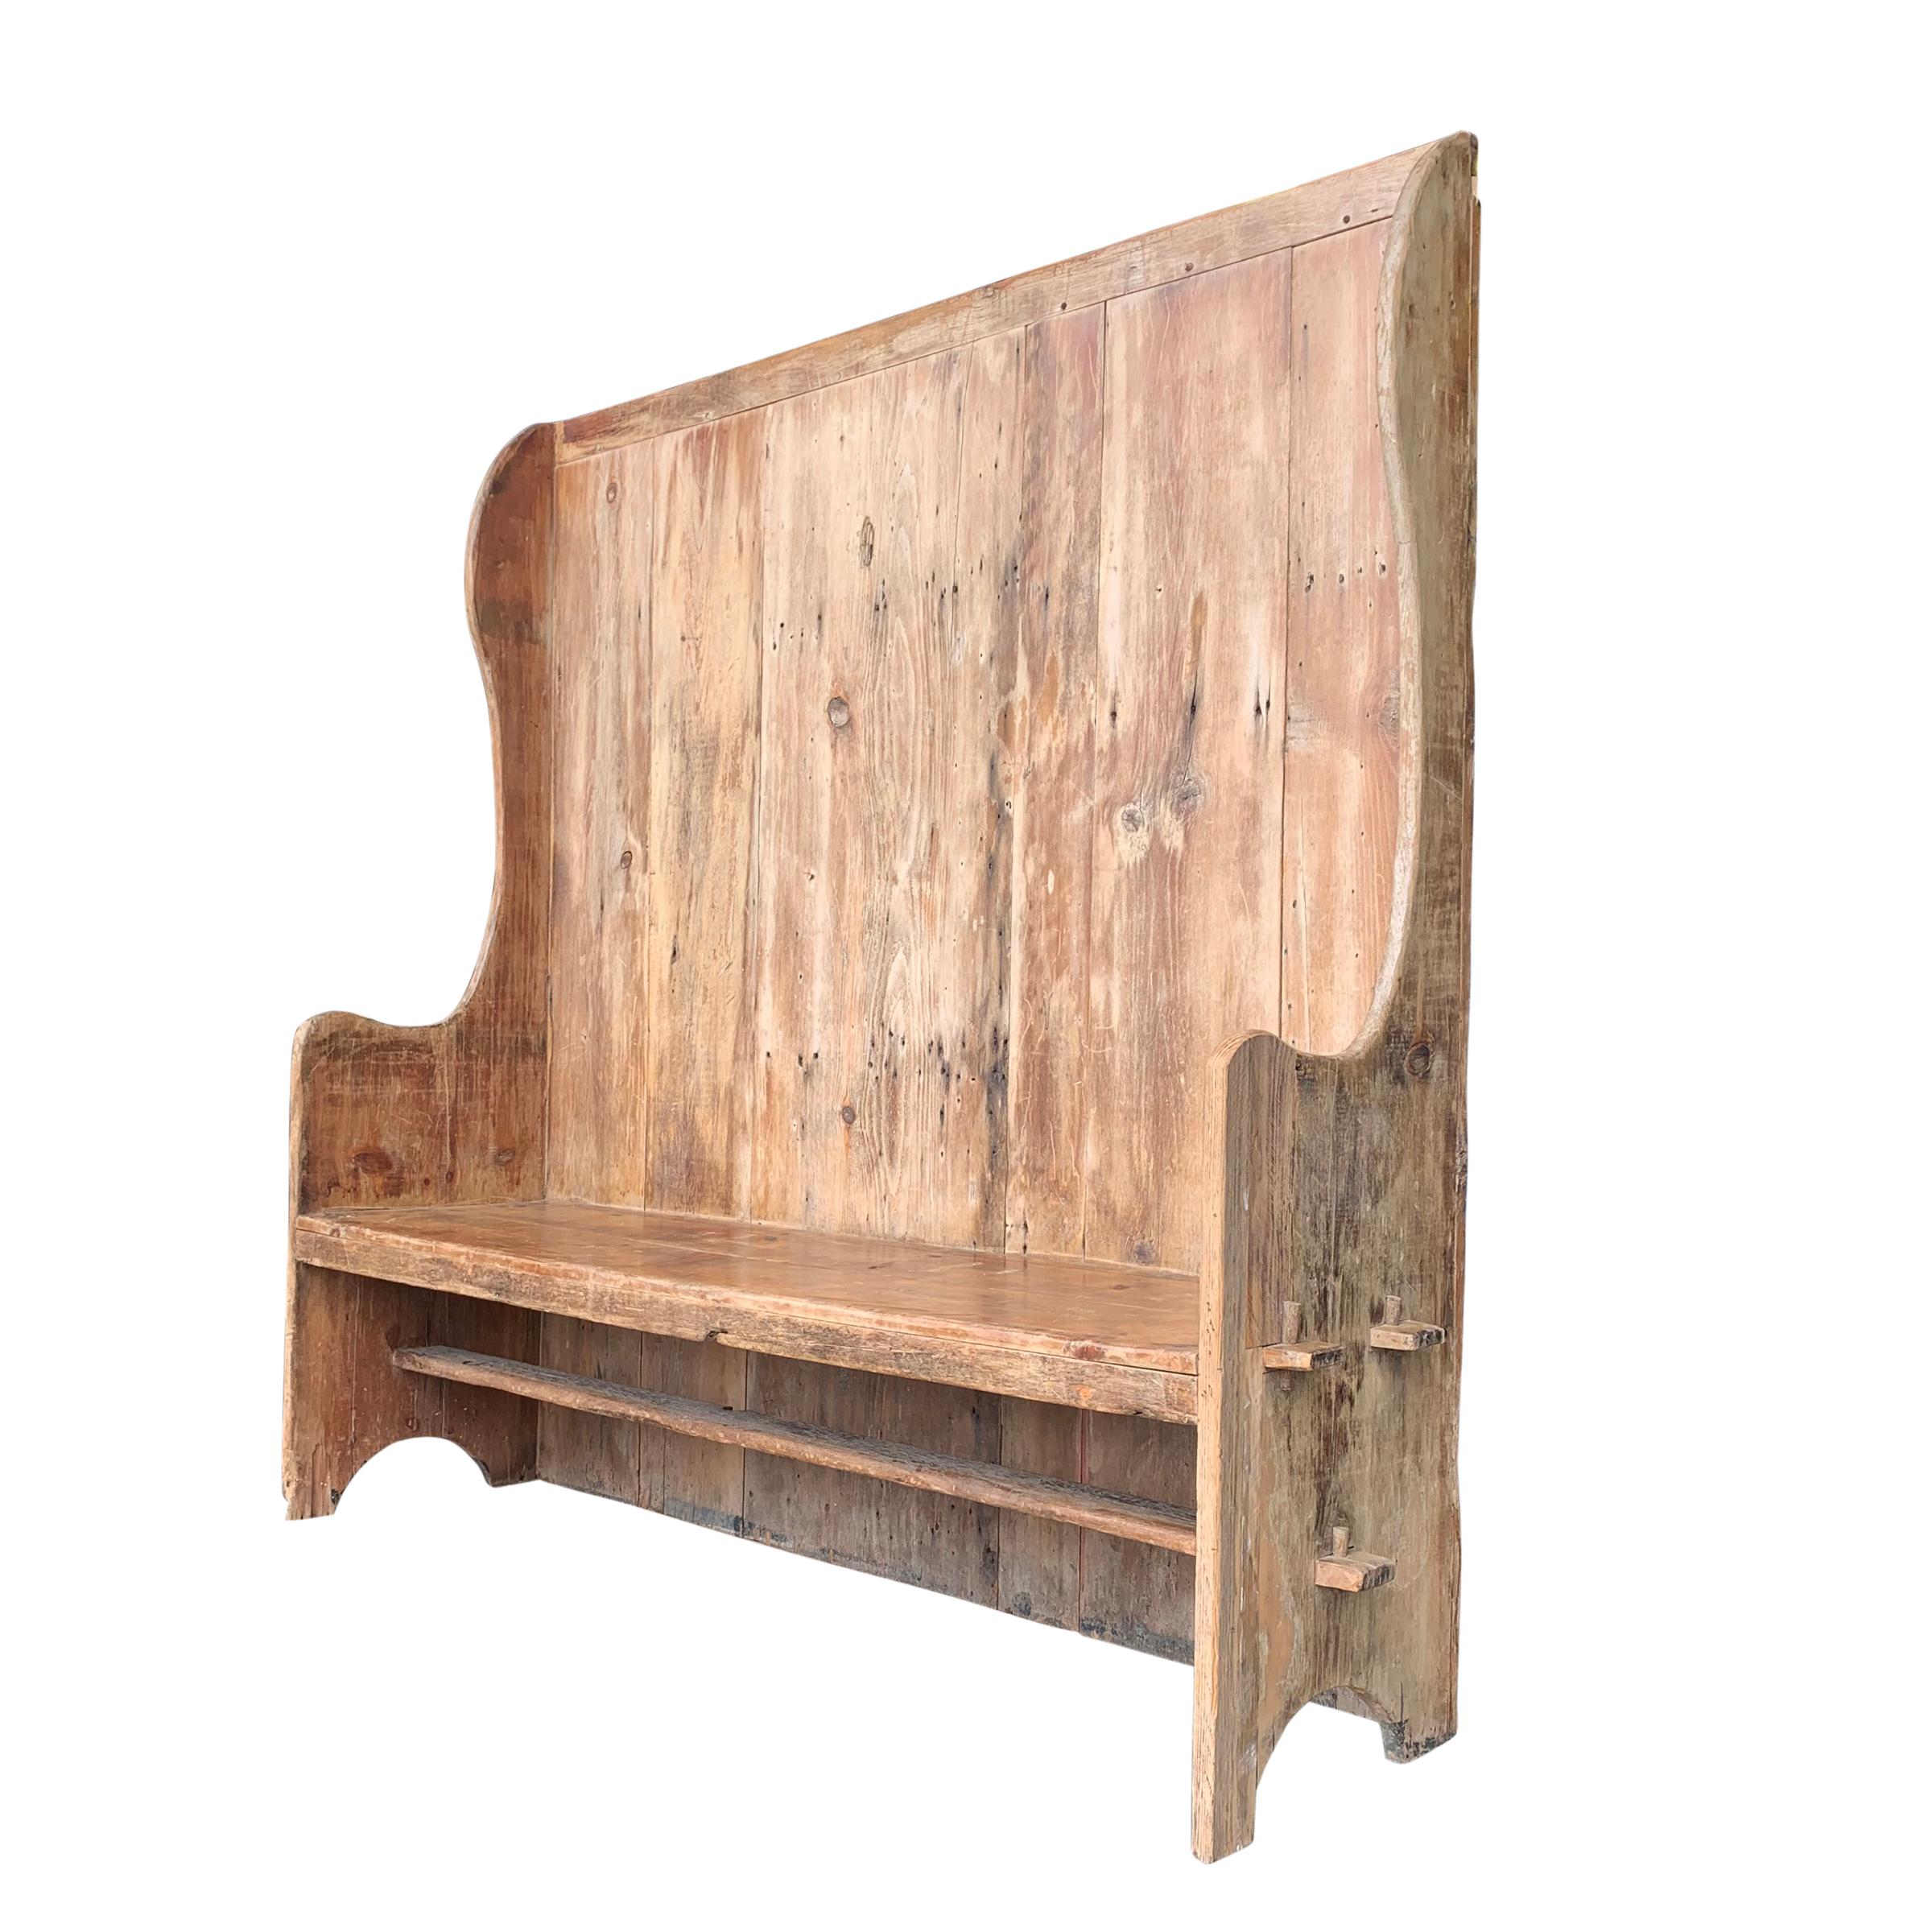 A wonderful 18th century English pine settle with a wide seat, a high back, wings, gently curved arms, and a wonderful natural patina. The seat is pegged into the sides, and is very sound!